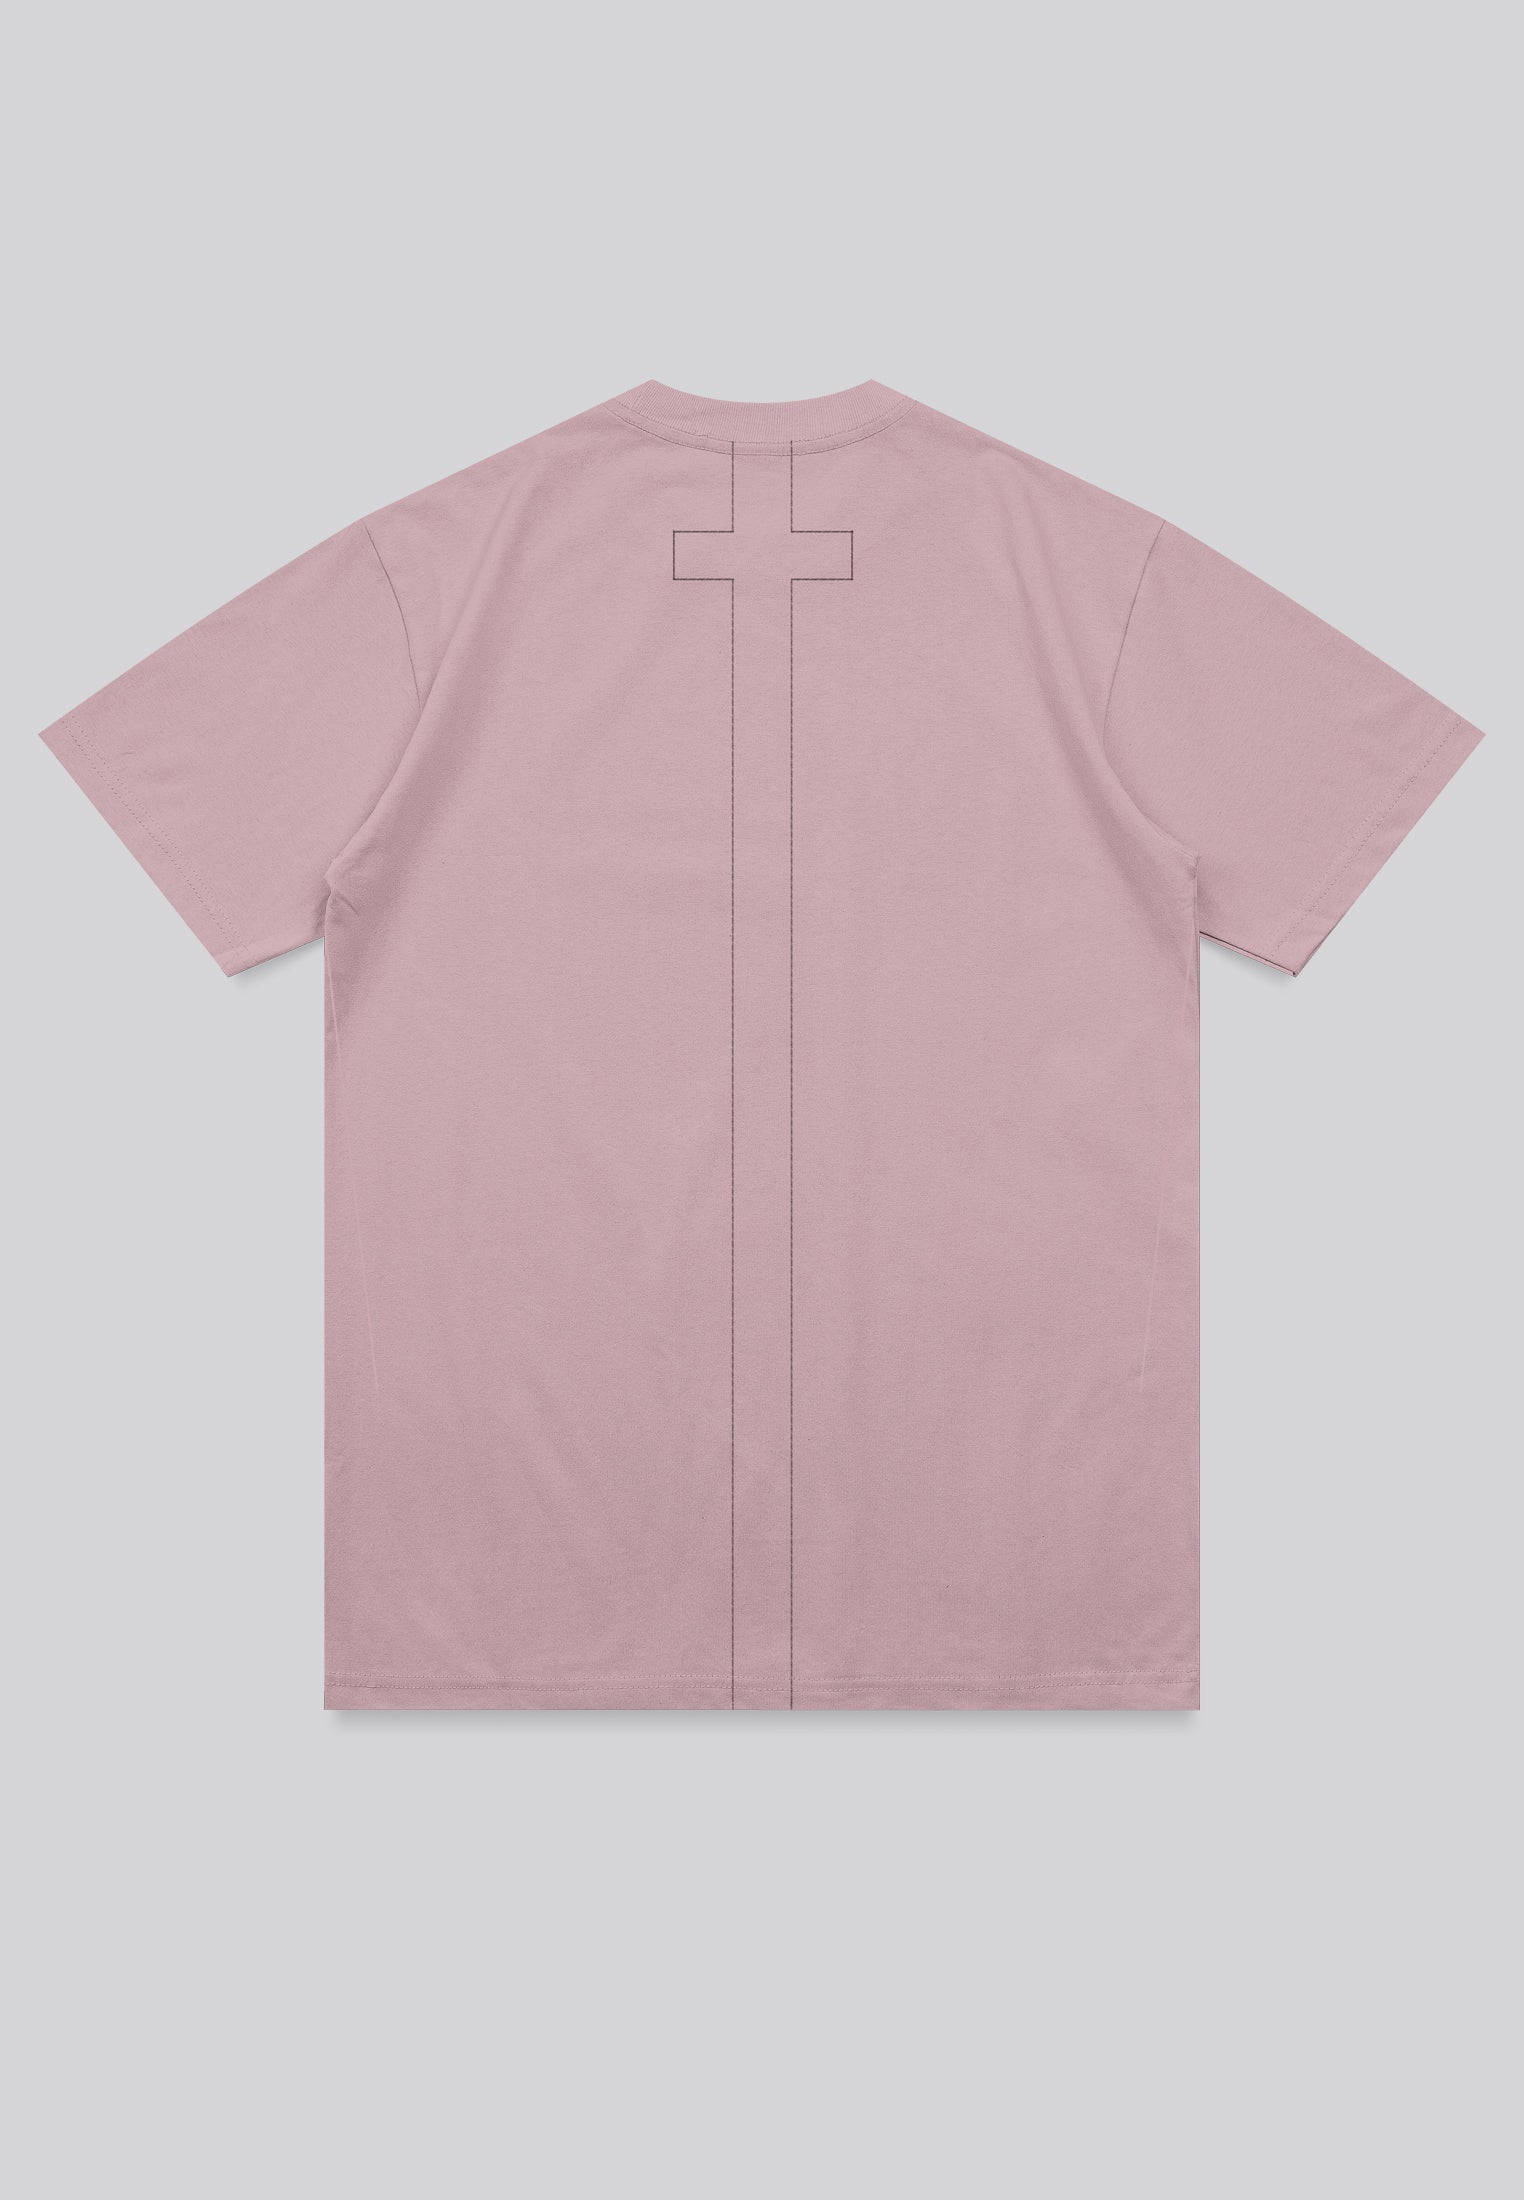 ESSENTIAL CORE PALE PINK T-SHIRT